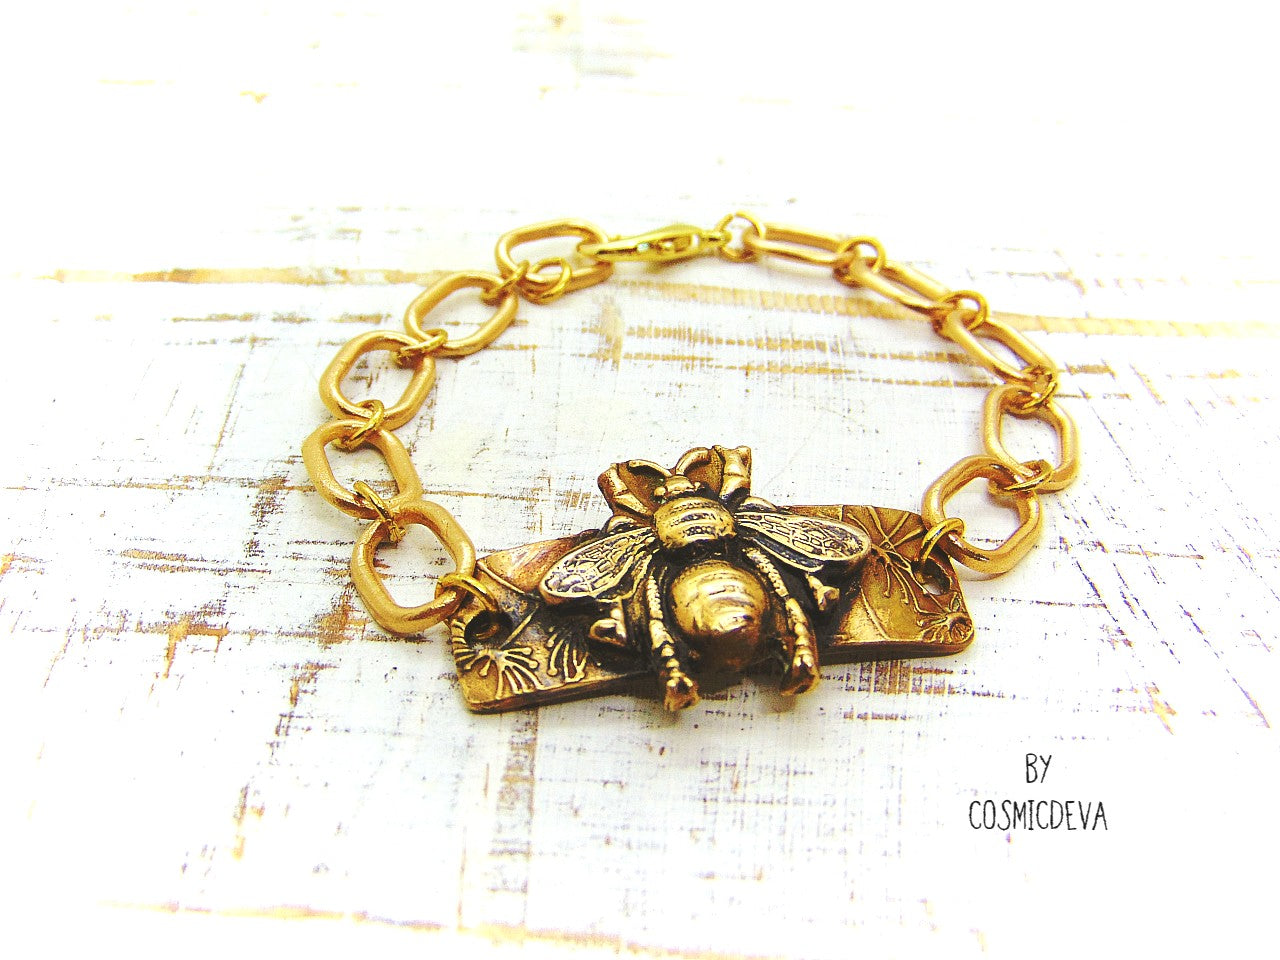 “Bee strong, Bee You, Bee Harmony” - Crafted with love and precision in our cozy Southeast Alabama home studio, this beautiful honeybee bracelet is a true work of art.  Each element, from the radiant recycled pure gold bronze honeybee charm tag to the intricate oval chain links, is individually meticulously handcrafted, hand carved and kiln fired, ensuring a piece that is as unique as it is elegant.